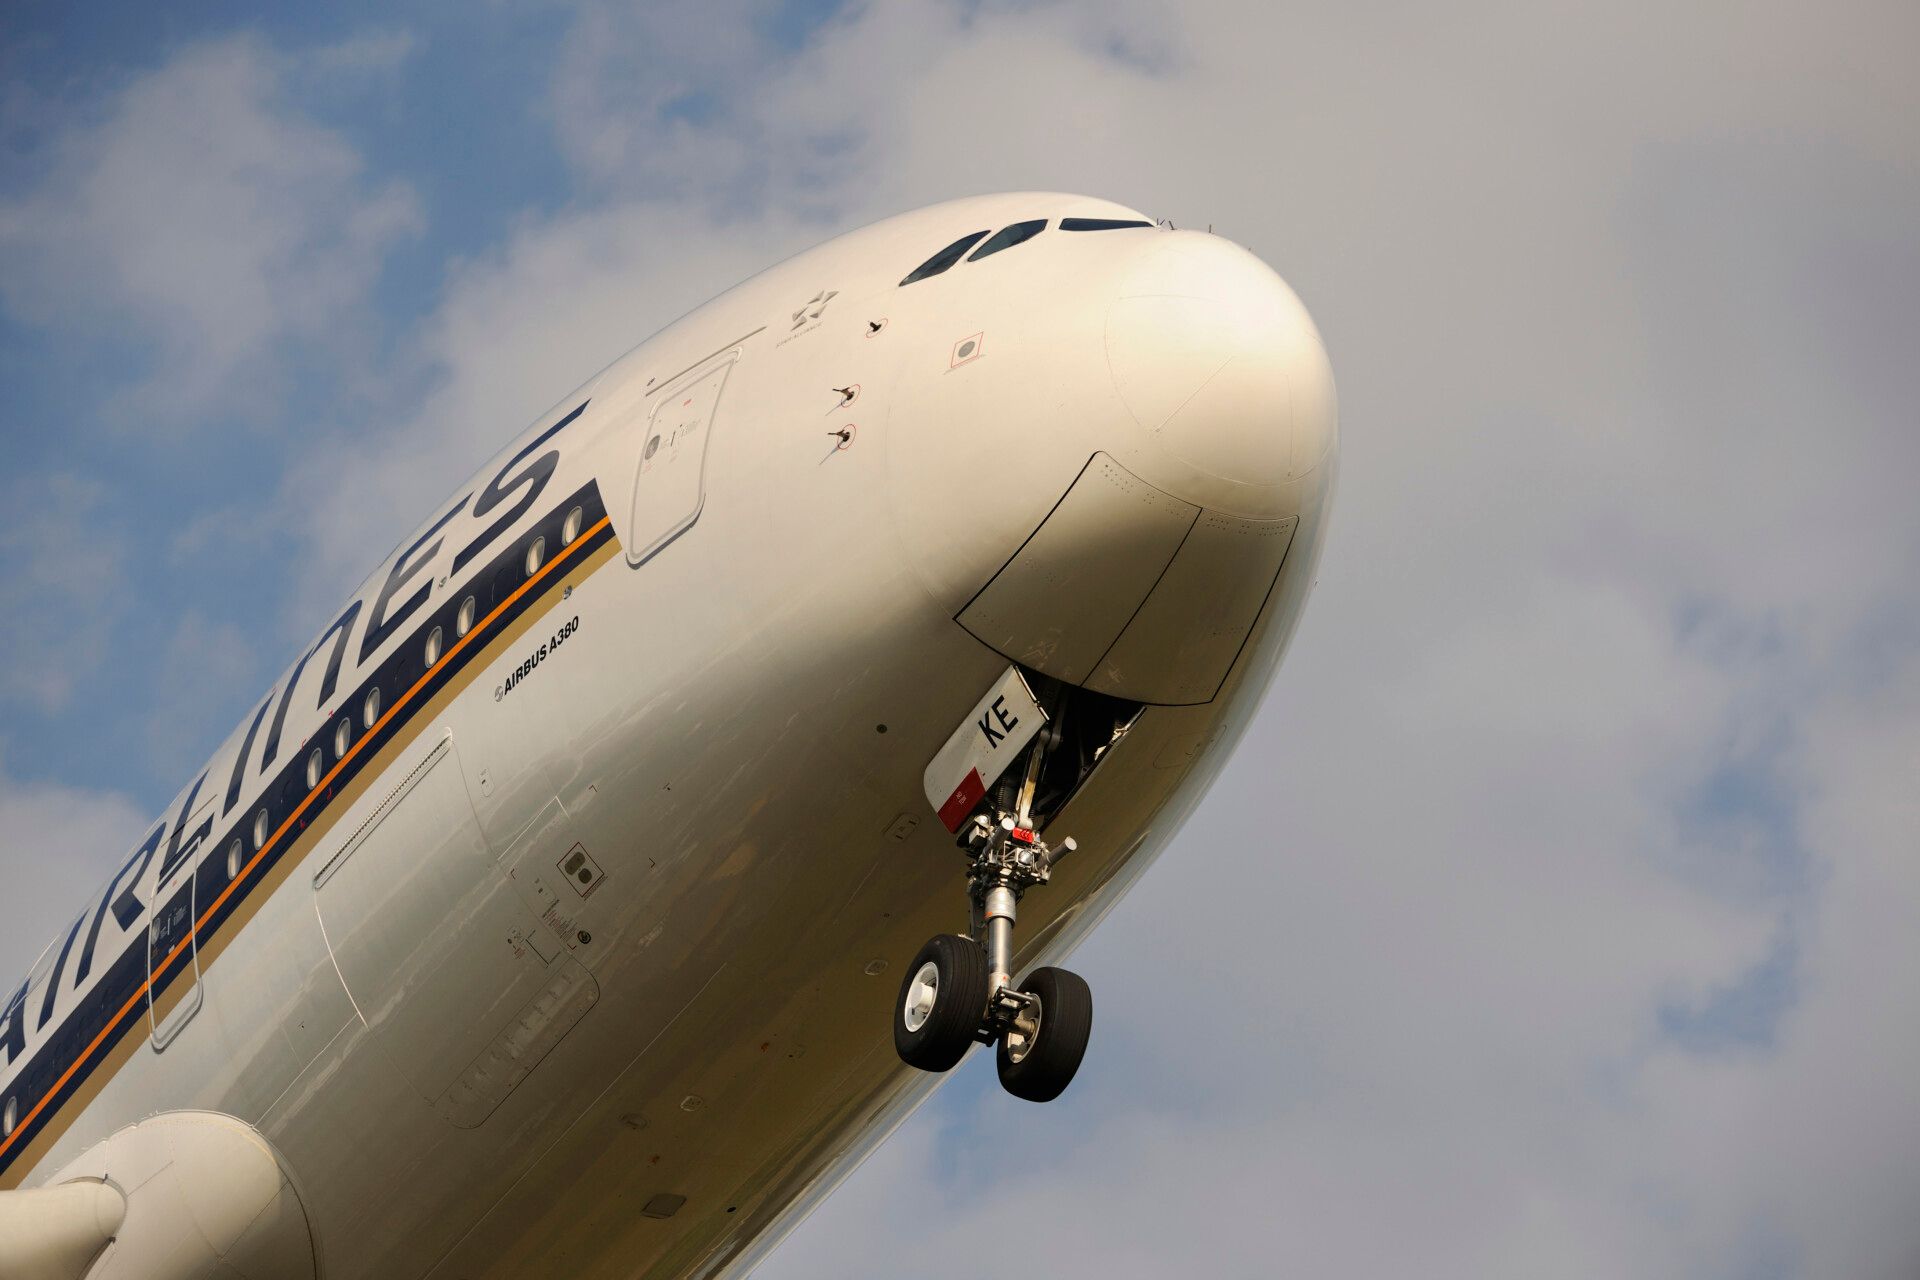 Singapore Airlines, Airbus A380, London Heathrow